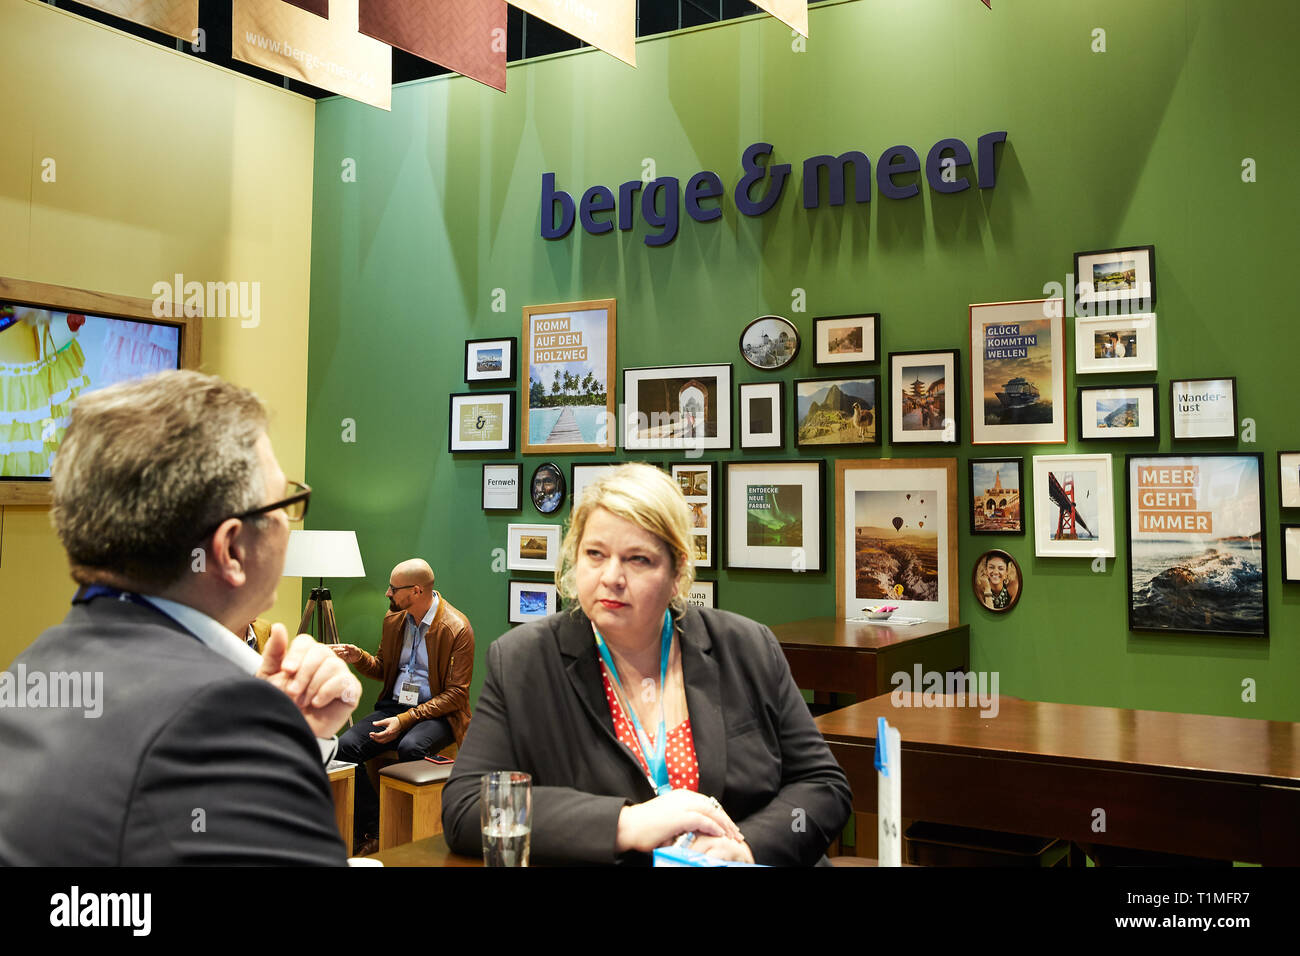 08.03.2019, Berlin, Berlin, Germany - Exhibition stand of Berge & Meer Touristik GmbH at the ITB in Berlin. 00R190308D074CAROEX.JPG [MODEL RELEASE: NO Stock Photo